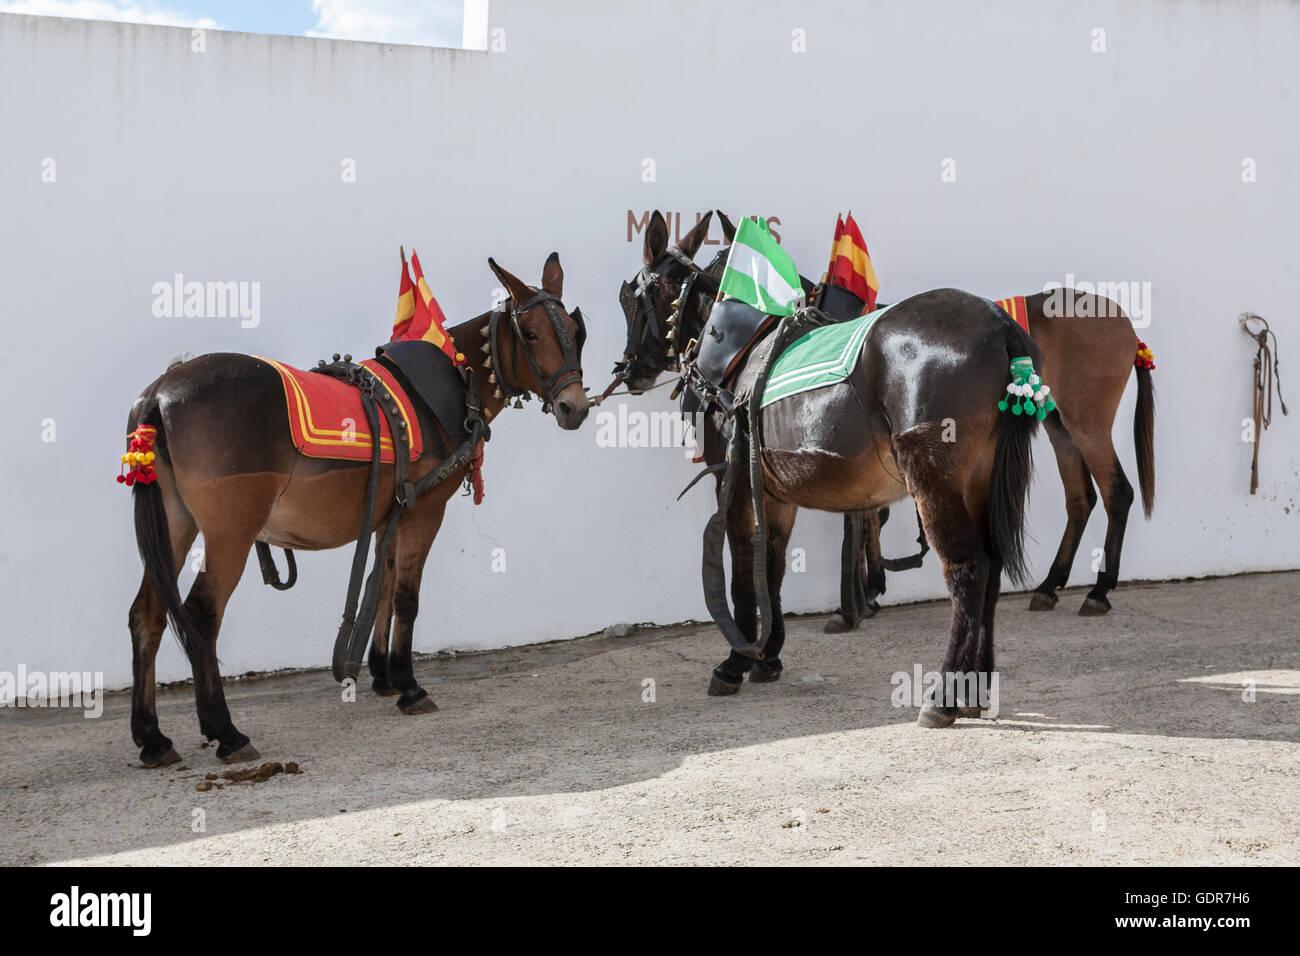 Drag mules are Bull died in the Bullfight to the slaughterhouse of the  bullring of Pozoblanco, Spain Stock Photo - Alamy